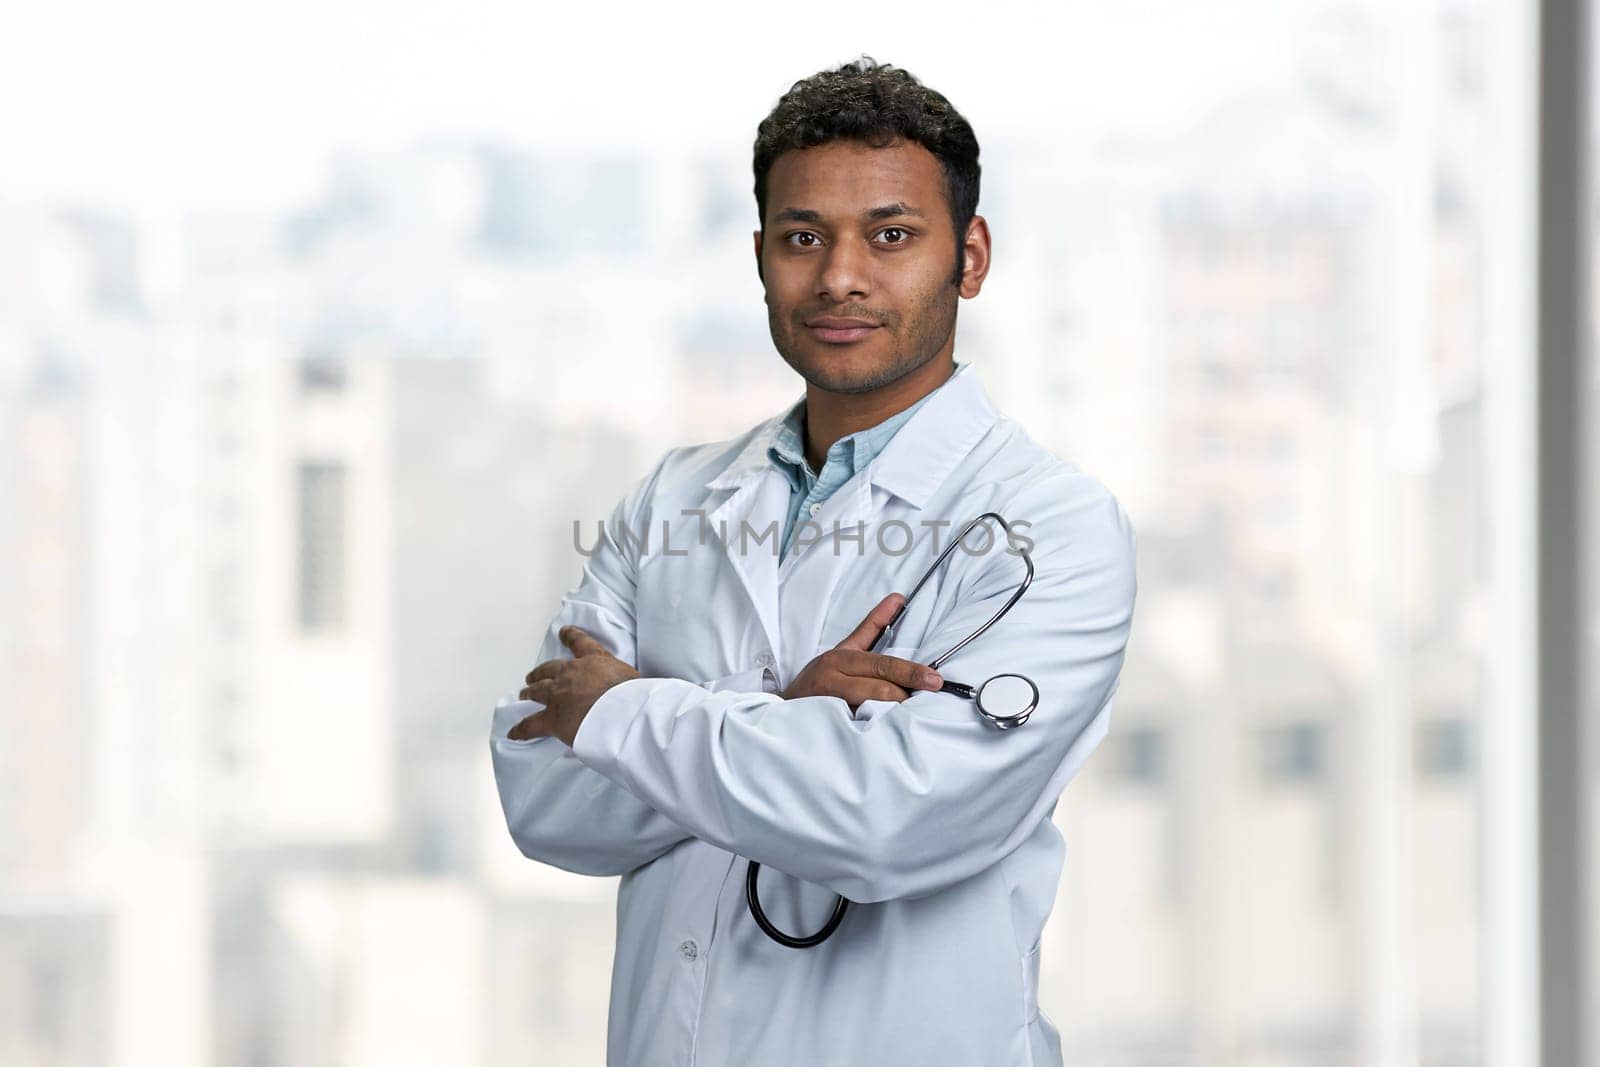 Young confident indian doctor with stethoscope looking at camera standing with arms crossed. People, medicine and occupation concept.